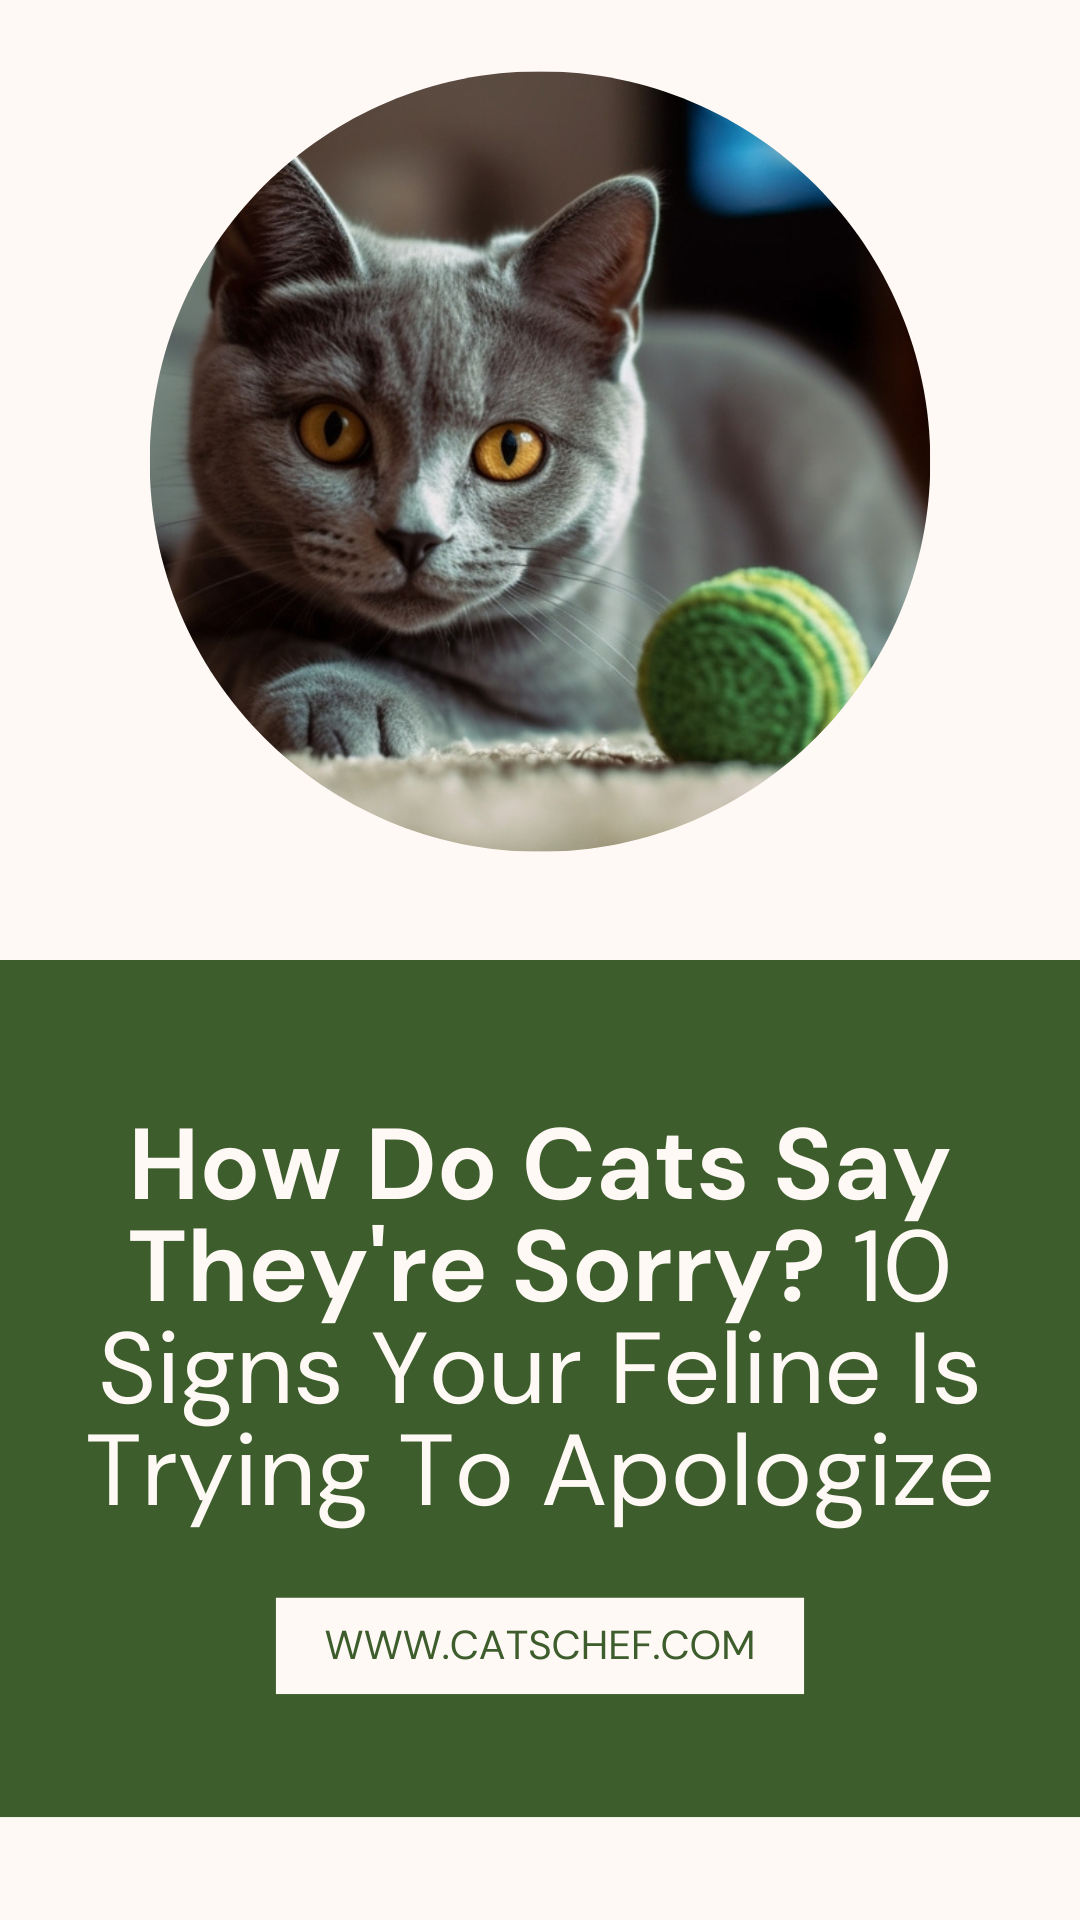 How Do Cats Say They're Sorry? 10 Signs Your Feline Is Trying To Apologize